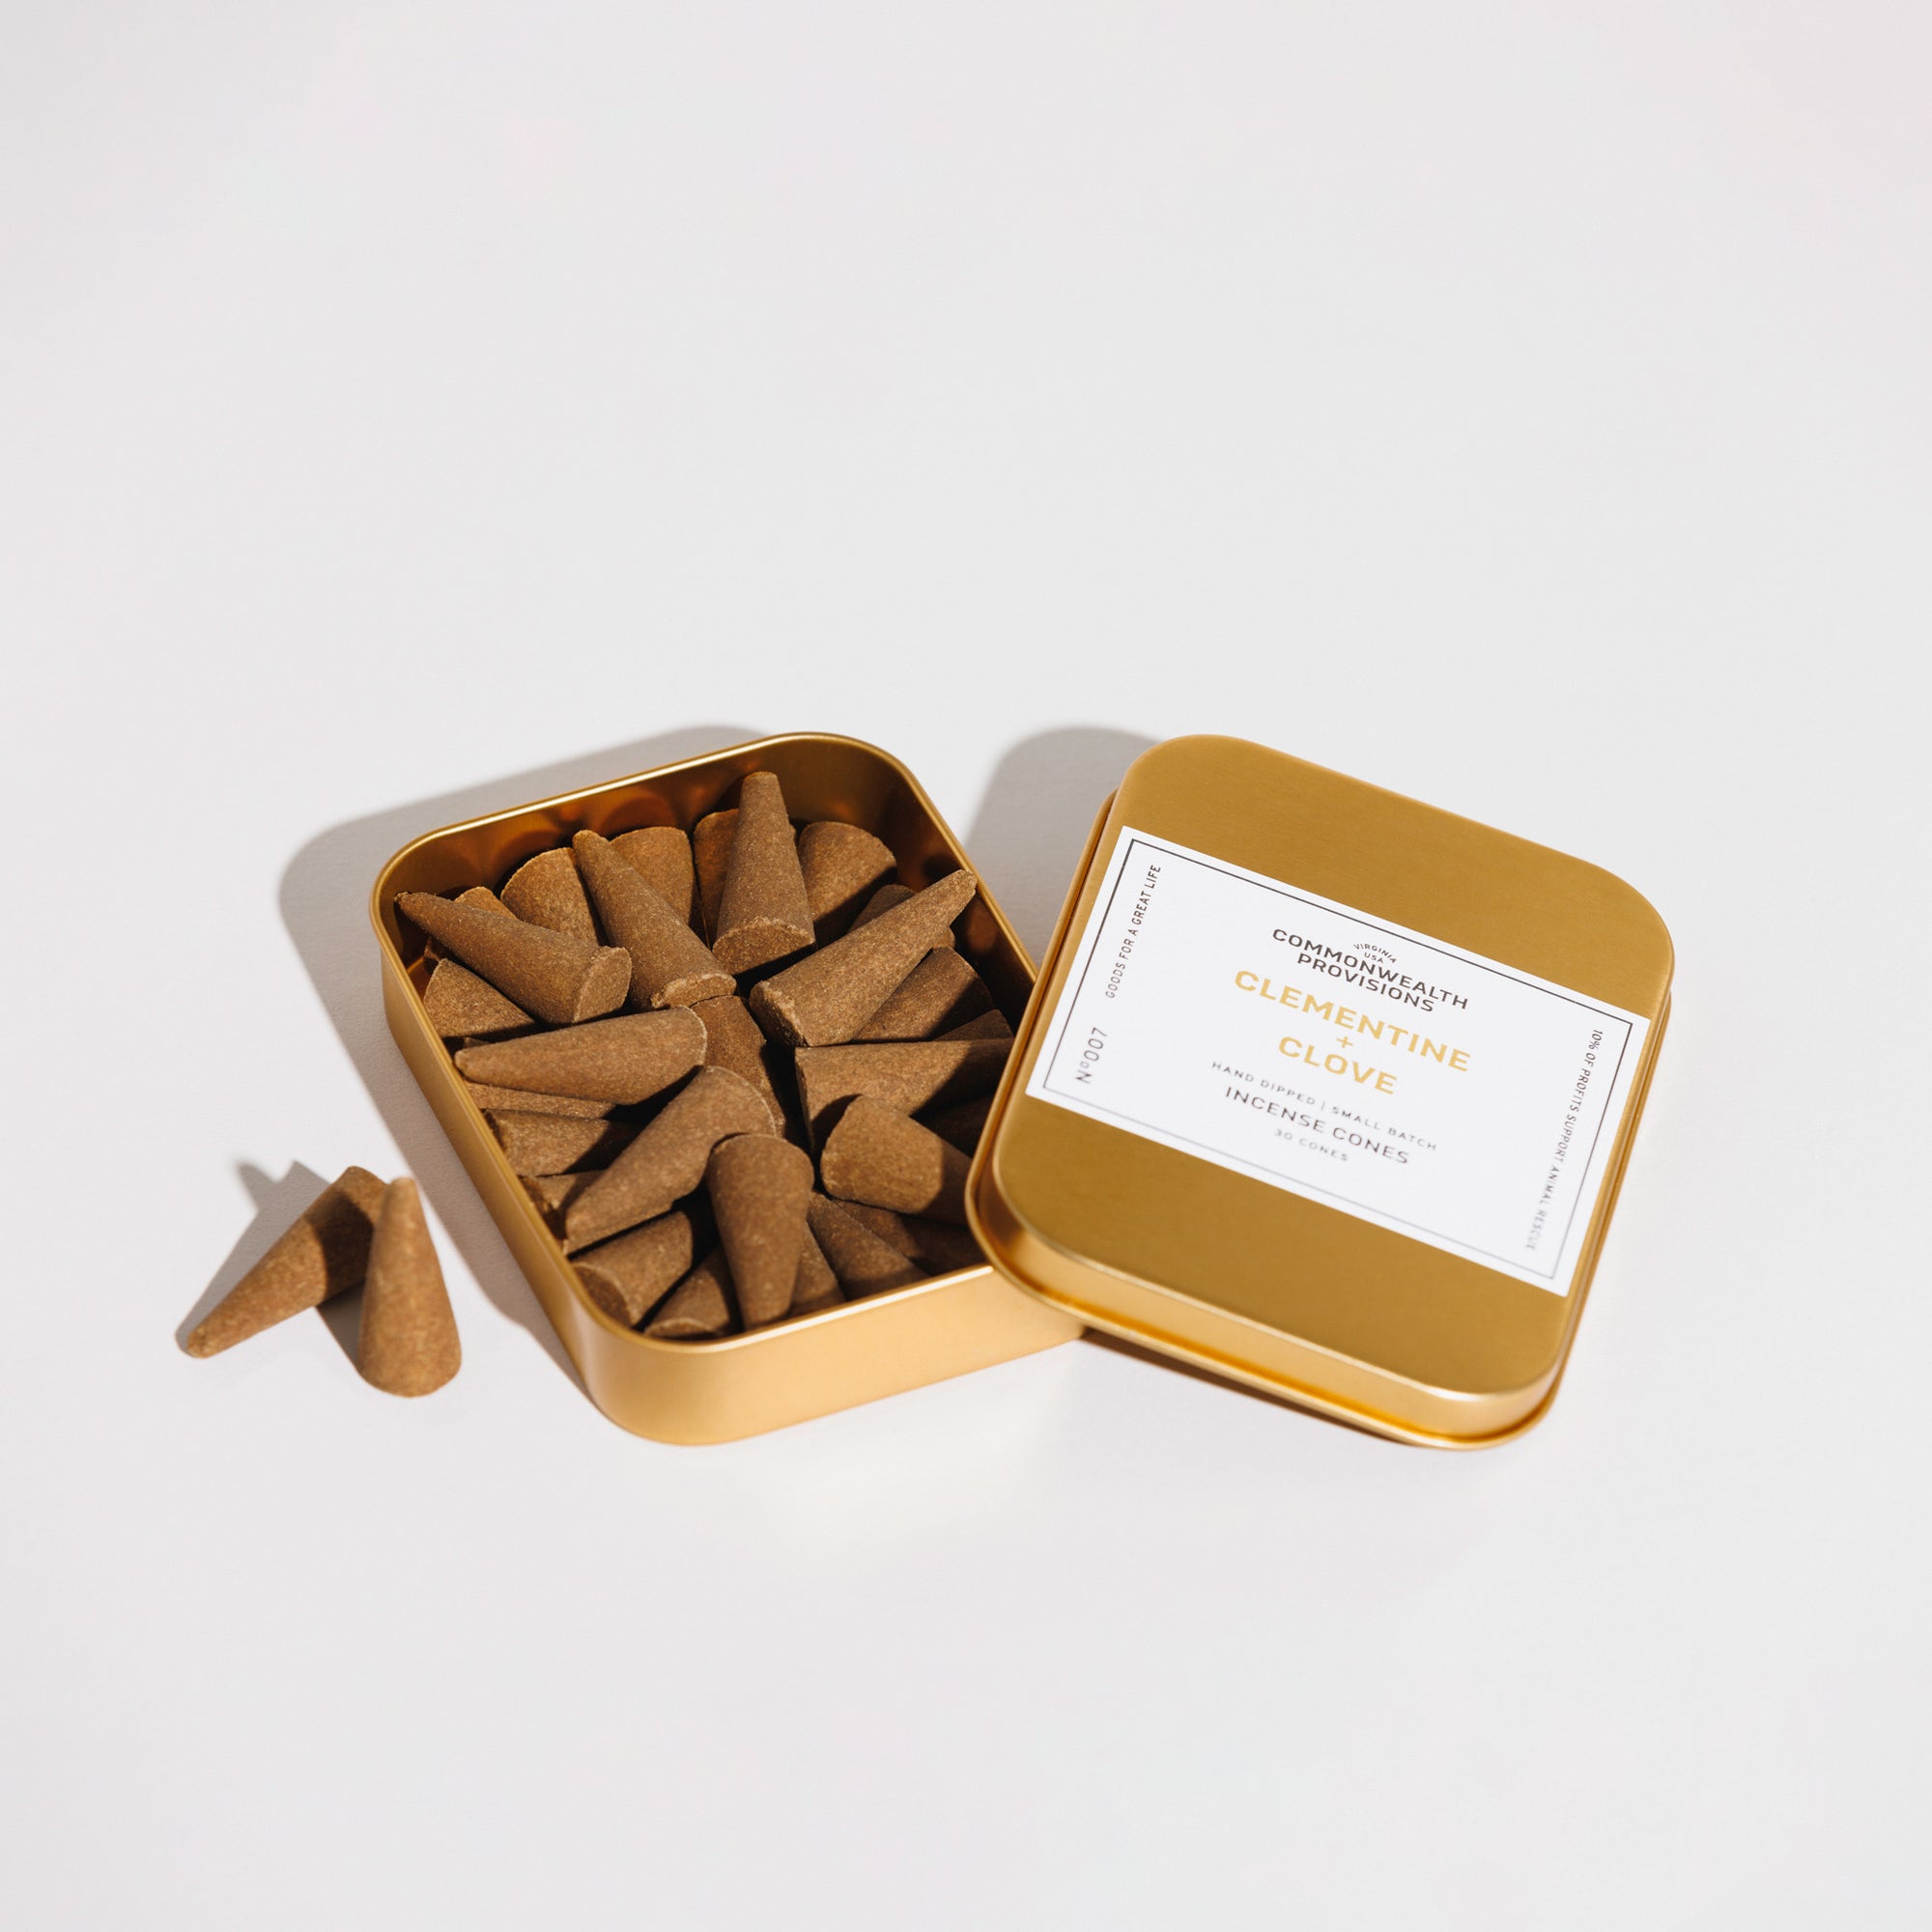 Clementine + Clove Incense Cones | Commonwealth Provisions